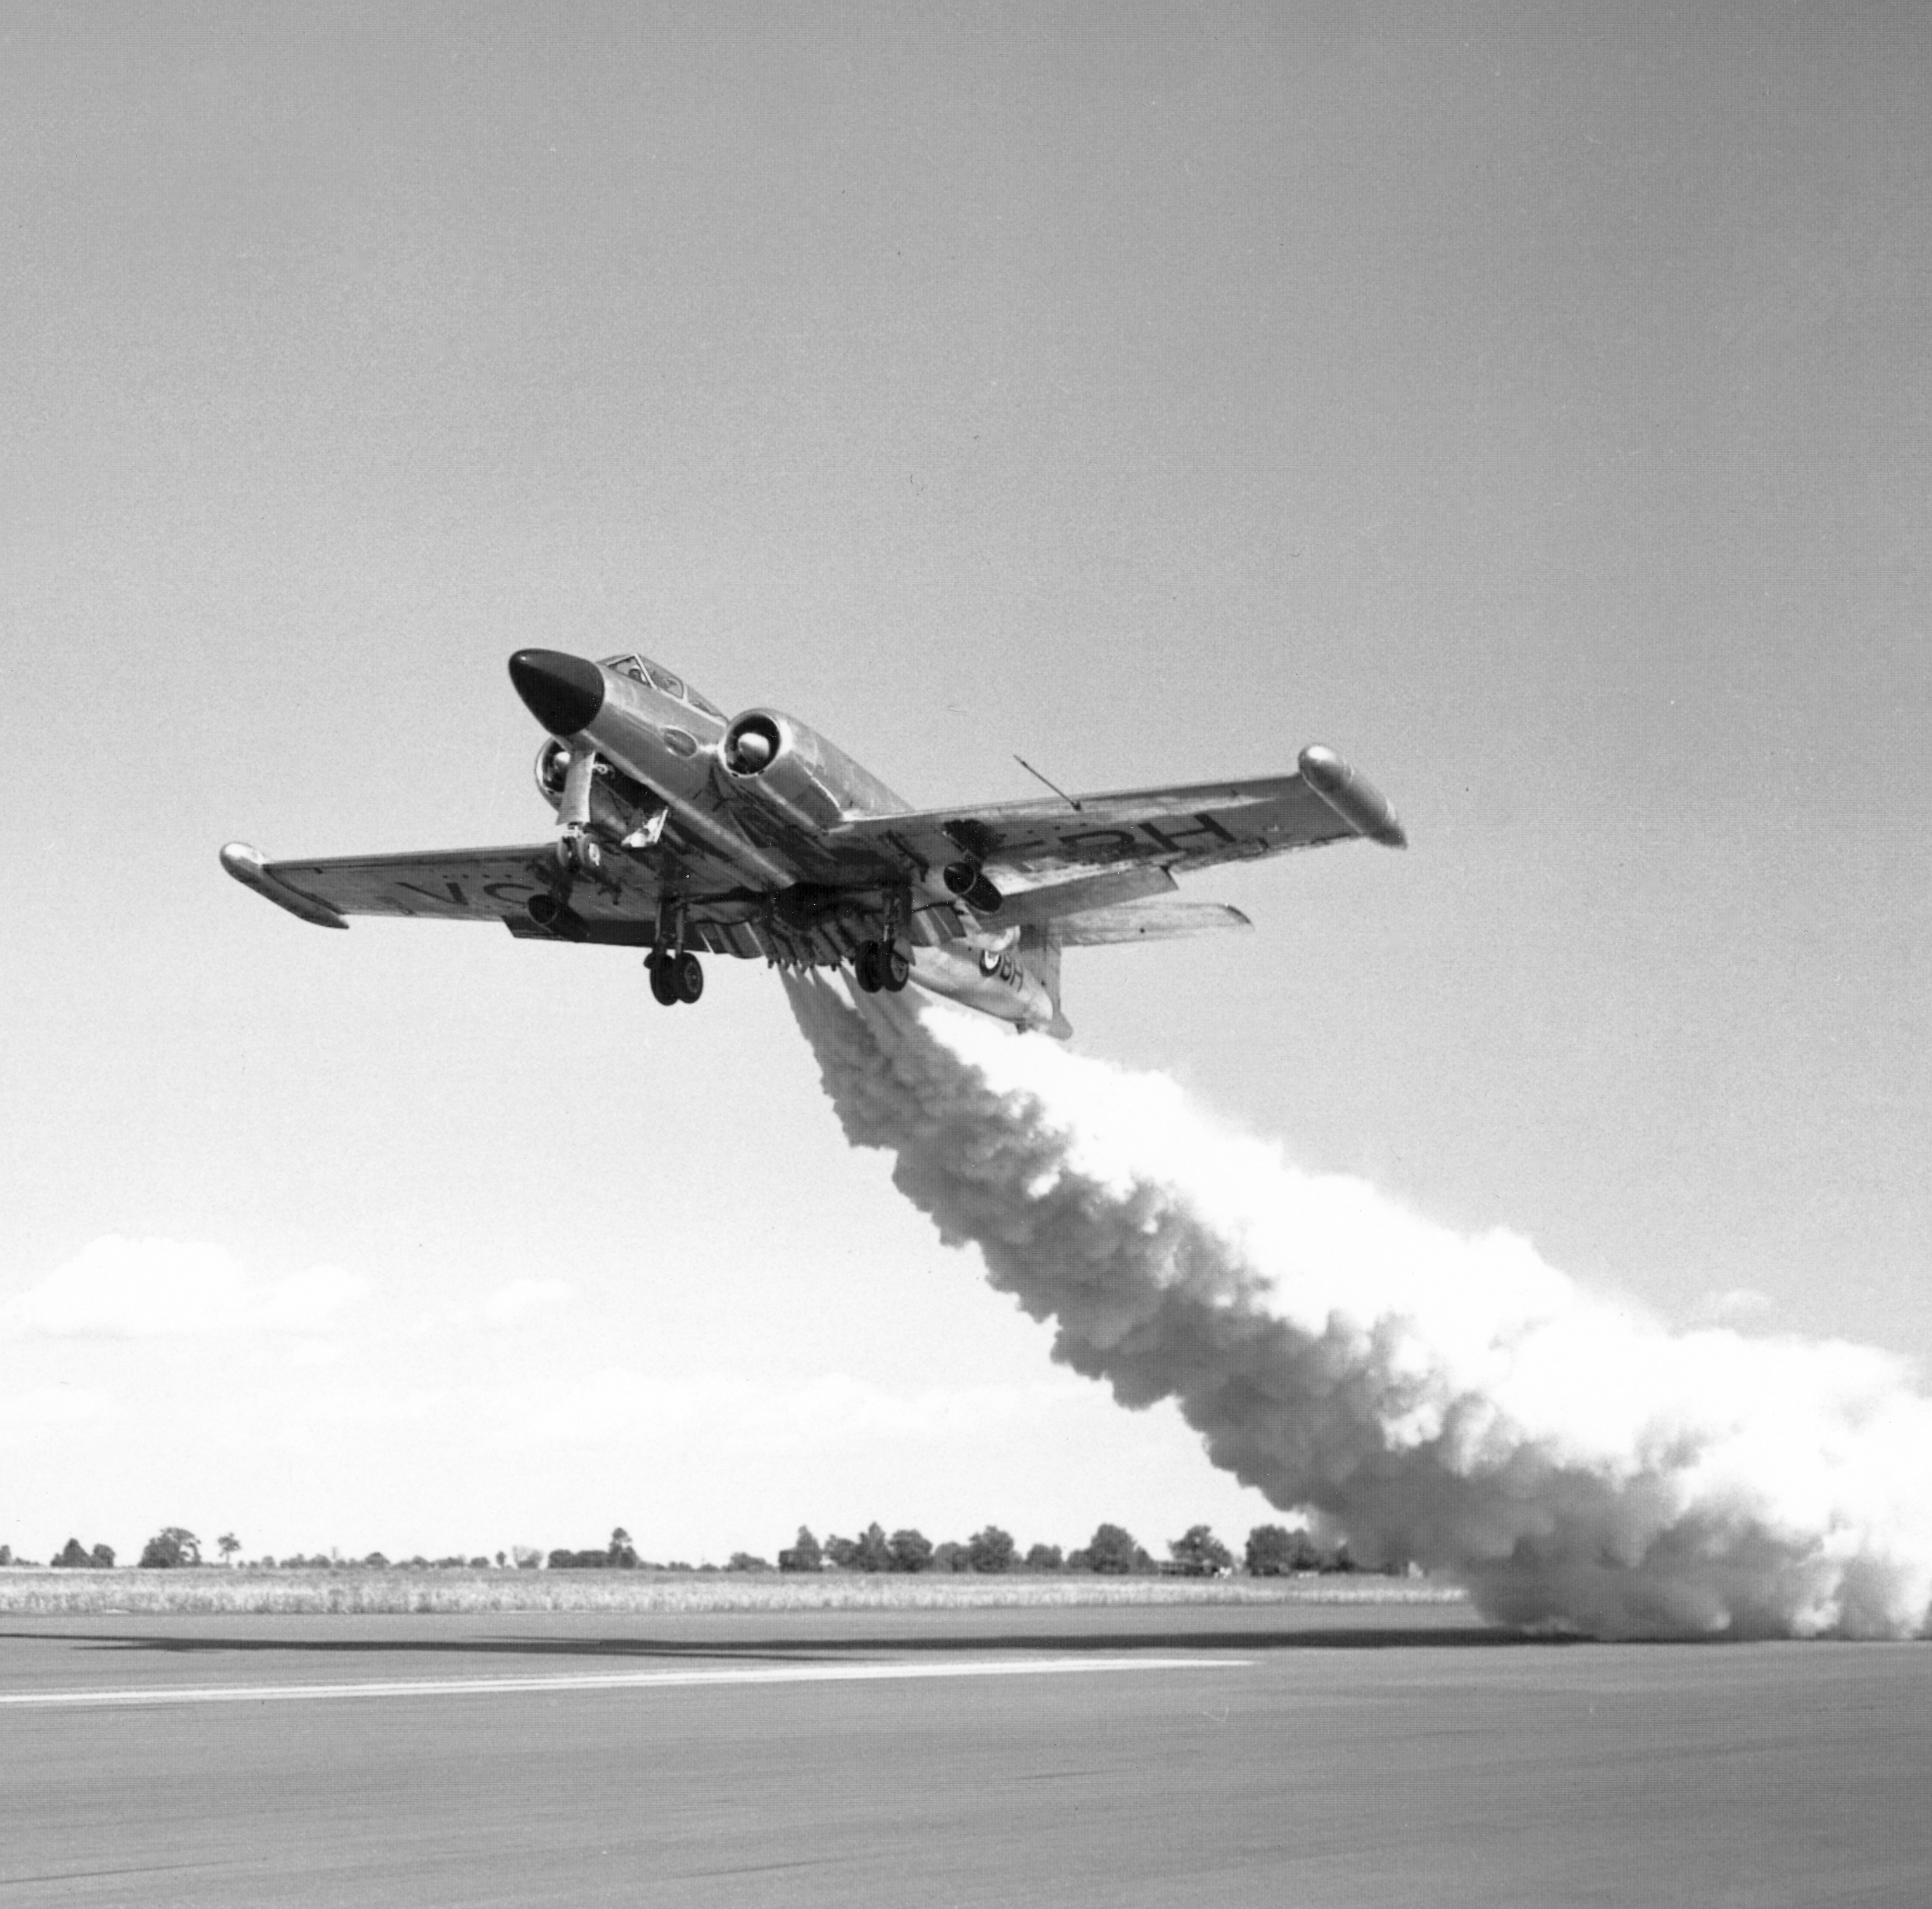 CF-100 Canuck. PHOTO: DND Archives, PL-54505